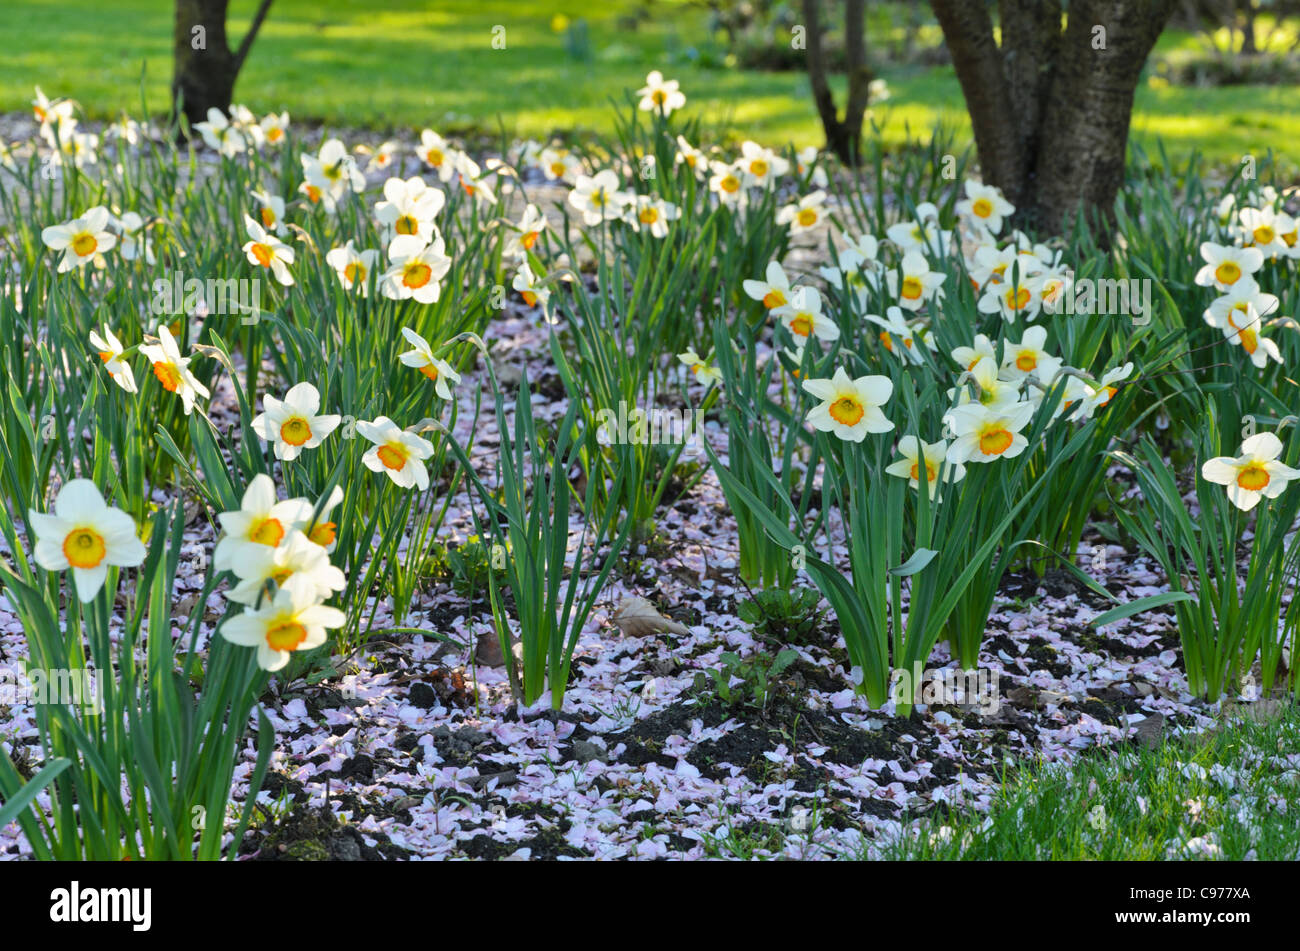 Daffodils (Narcissus) with cherry flowers Stock Photo